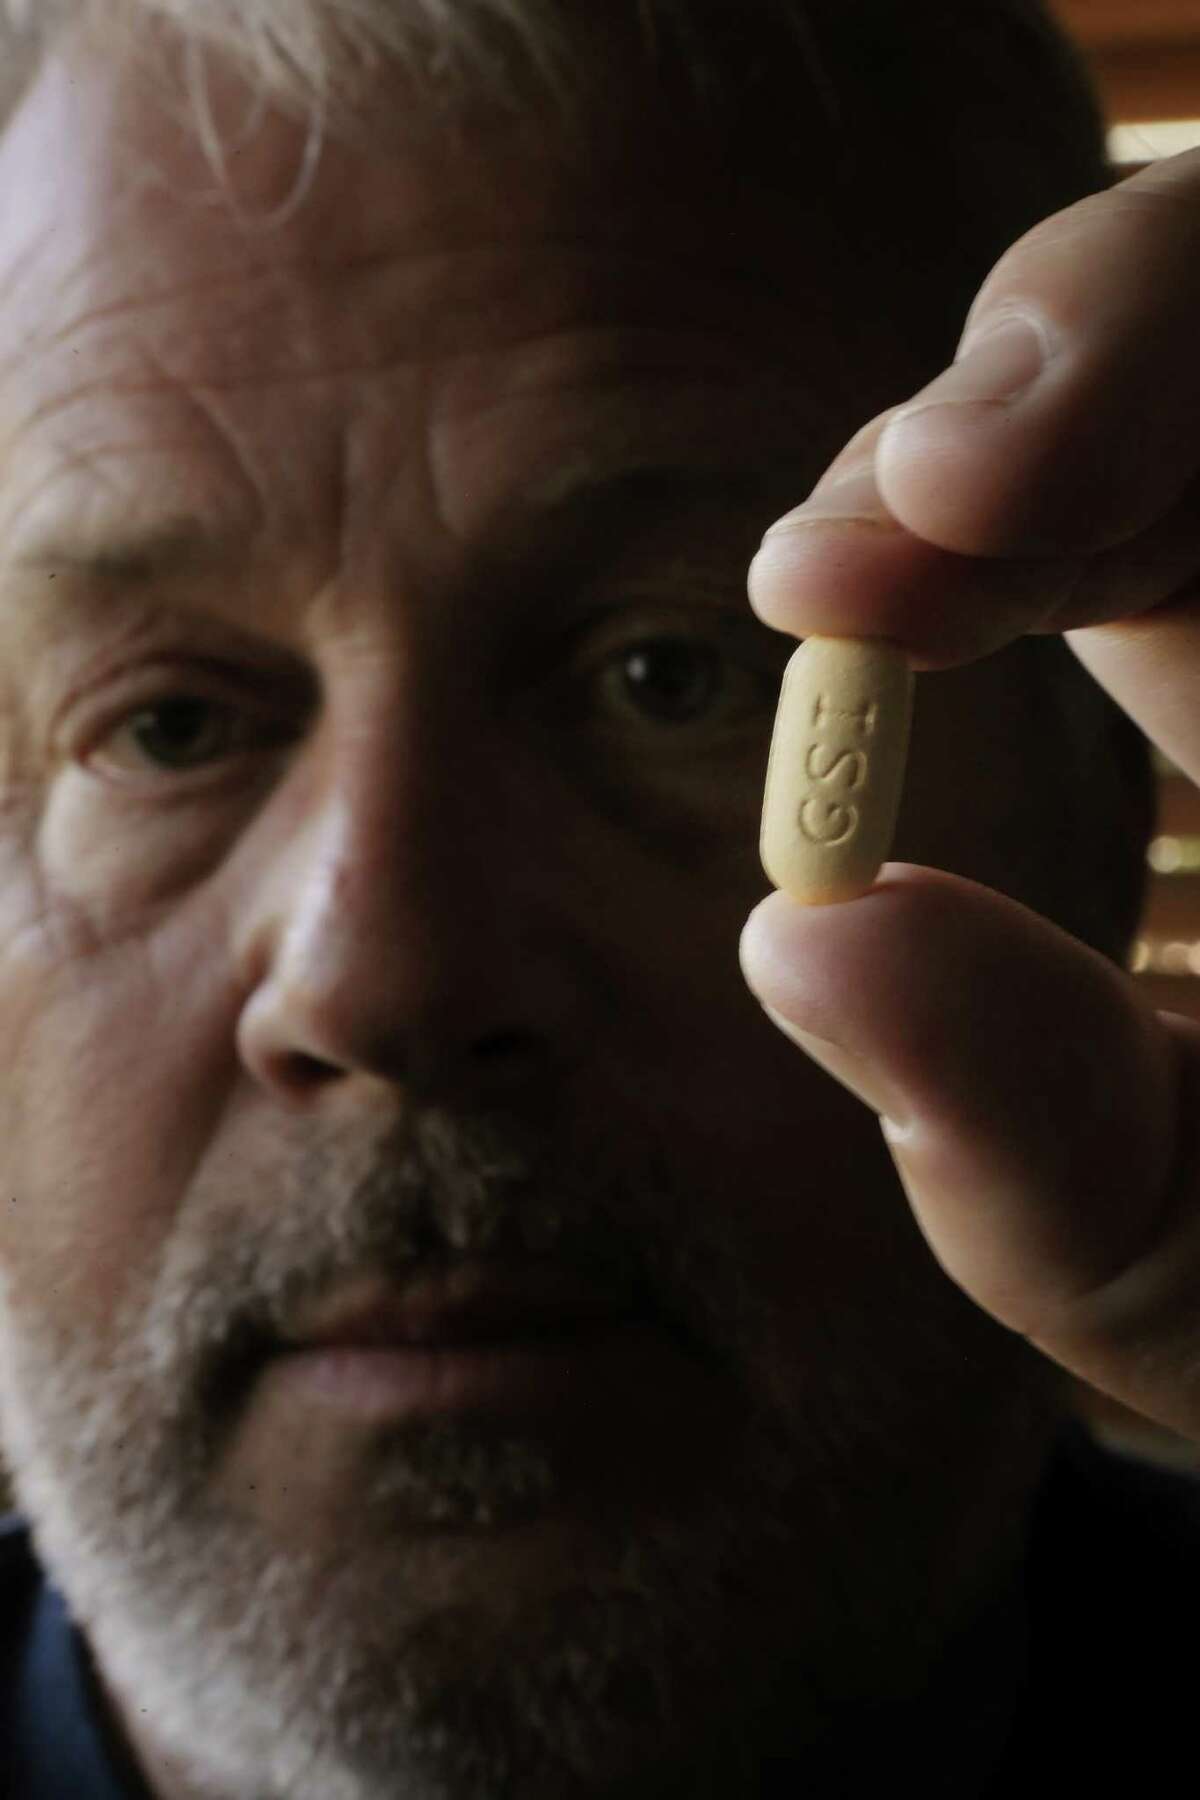 Scott Barnes holds a pill of Sovaldis in his San Luis Obispo, Calif., home on Wednesday, April 30, 2014. Barnes is a Vietnam War army veteran who suspects he caught hepatitis C (before it was known by that name) toward the end of the war (1973) but wasn't officially diagnosed until the 2000s. He was able to convince his VA doctors to help him get on a regimen of Sovaldis, a drug developed by Gilead Sciences, which is hailed as a cure for hepatitis C. He has stage IV hep C, and sees this treatment as his last chance.